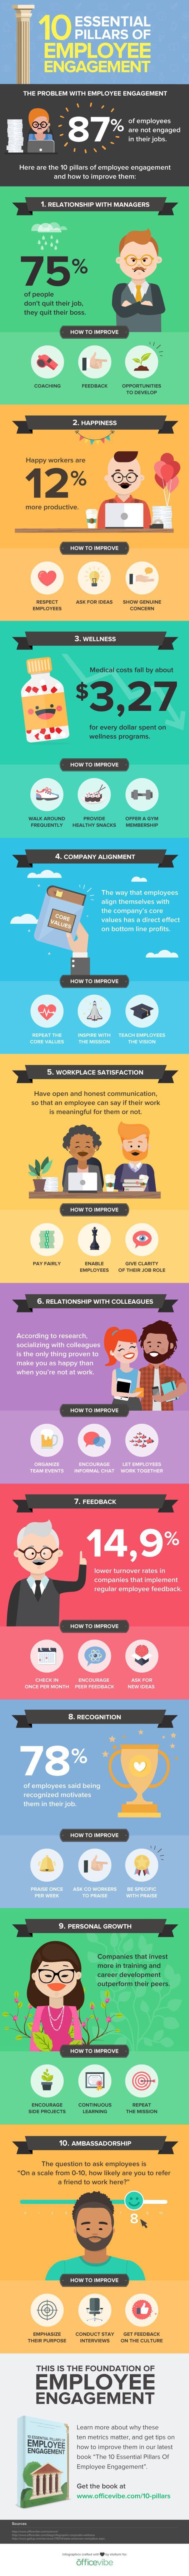 Management : infographic : infographic : 10 Keys to Increasing Employee ...